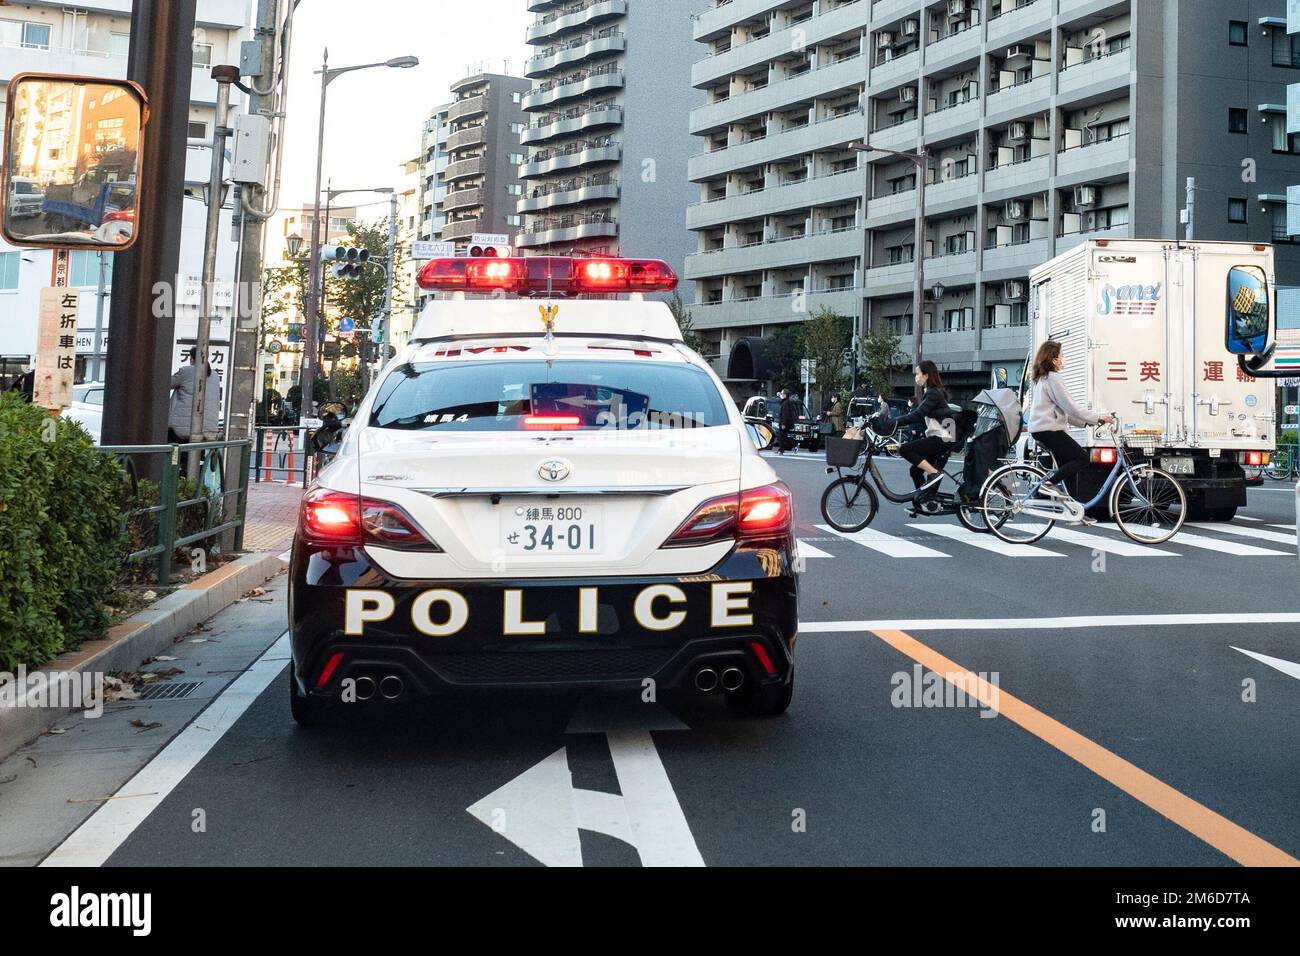 Tokyo, Japan. 25th Nov, 2022. A Tokyo Metropolitan Police cruiser driving on patrol in Nakano. Law Enforcement Officers, LEOs, Japanese authorities, traffic enforcement, tokyo drift.Japan has recently reopened to tourism after over two years of travel bans due to the COVID-19 pandemic. The Yen has greatly depreciated against the USD US Dollar, creating economic turmoil for international trade and the Japanese economy. Japan also is now experiencing a daily count of over 100,000 new COVID-19 cases a day, with Tokyo making up roughly a fifth of those cases caused by the SARS-CoV-2 virus. (C Stock Photo